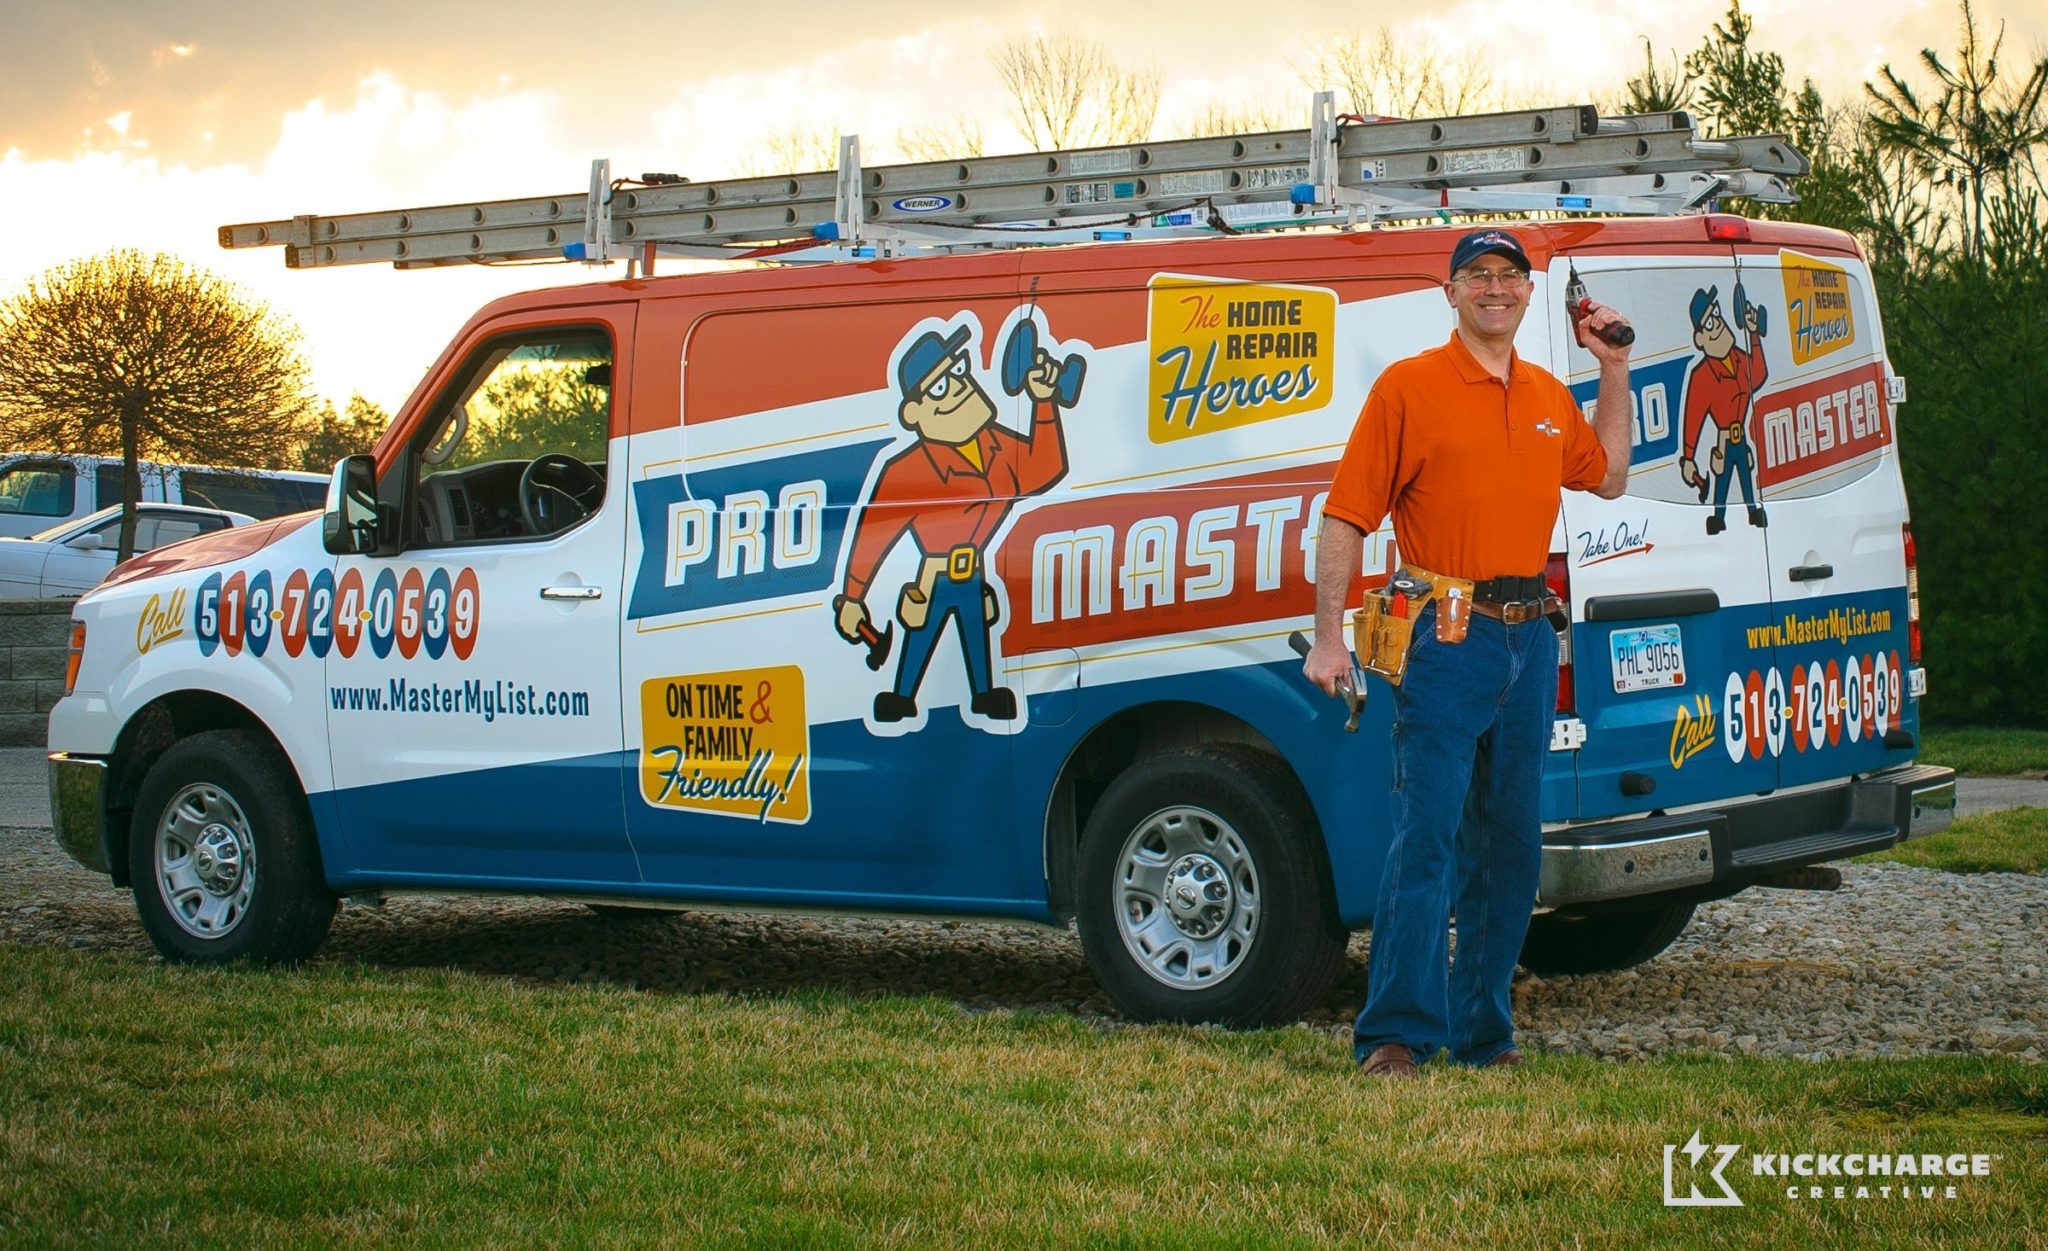 One of our best truck examples which illustrate the important of branding holistically - from the uniforms all the way through the truck wrap design. This is an amazing handyman company in Ohio.